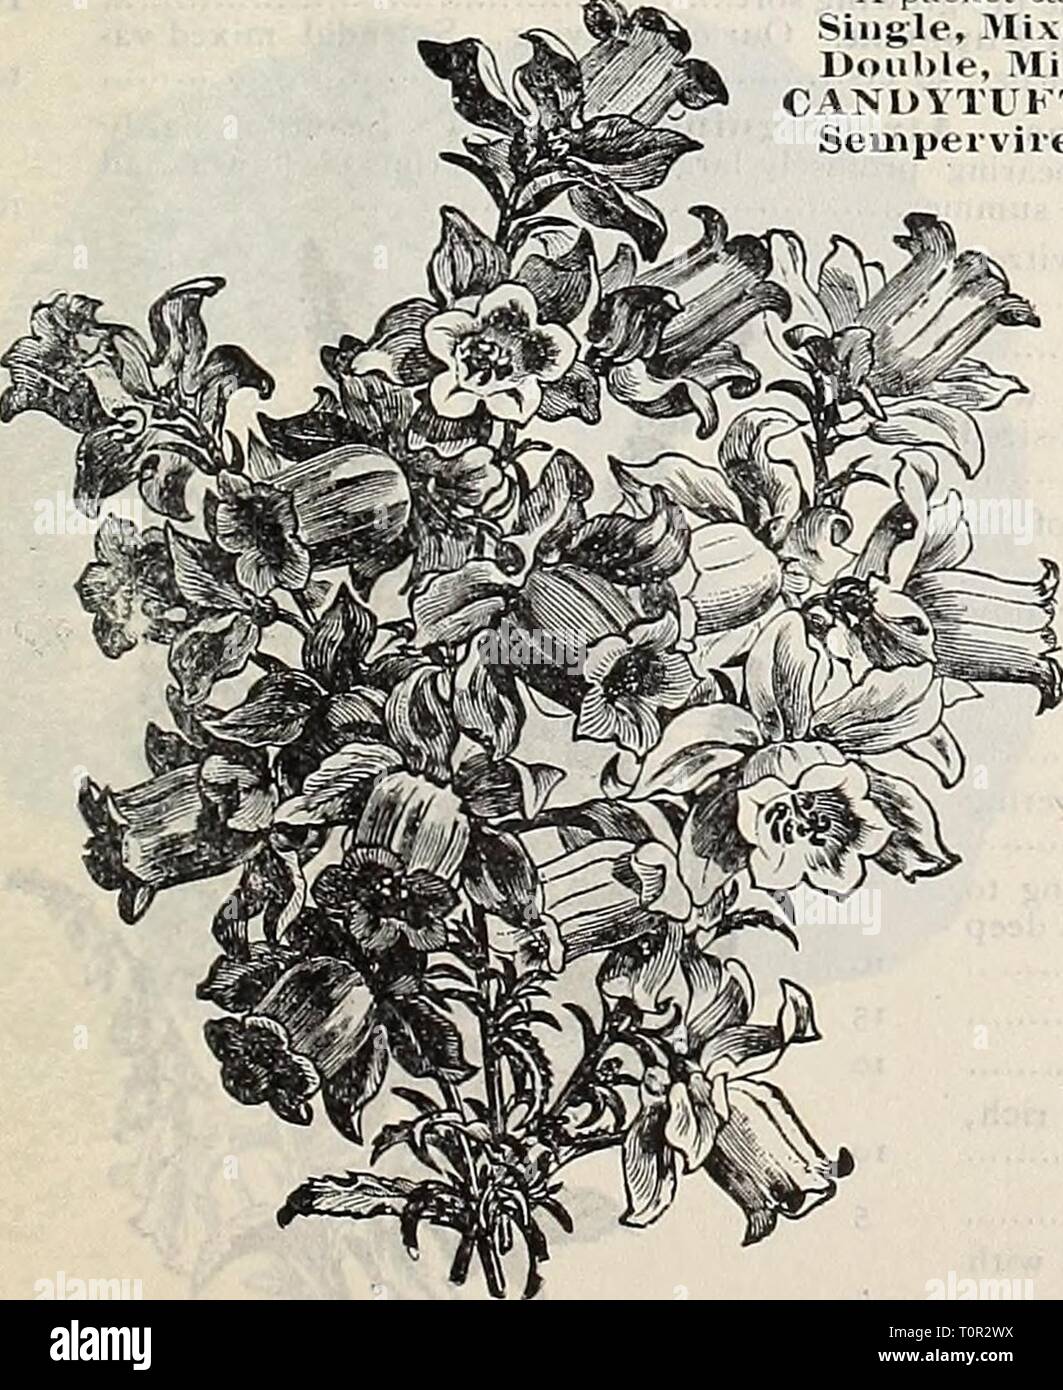 Dreer's autumn catalogue 1906 (1906) Dreer's autumn catalogue 1906  dreersautumncata1906henr Year: 1906  15 Aquilegia (Columbine). BUDDLEYA. Variabilis. A fine hardy, shrubby plant, with racemes of rosy-lilac blossoms CALCEOLARIA. Hybrida Grandiflora, Mixed. Beauti- ful, rich, self-colored flowers Tigrina. Tigered and spotted flowers Pumila Compacta, Of dwarf, compact growth CALLIKHOE. .noncv2LV-A (Fopfy'IMalloiv). A showy, trail- ing, hardy perennial, bearing continuonsl)' large, bright crimson saucer-shaped flowers - CAiMPANlILA (Bellflower). Cav^siXW-a {Carpathian Hare- bell). Free-flowe Stock Photo